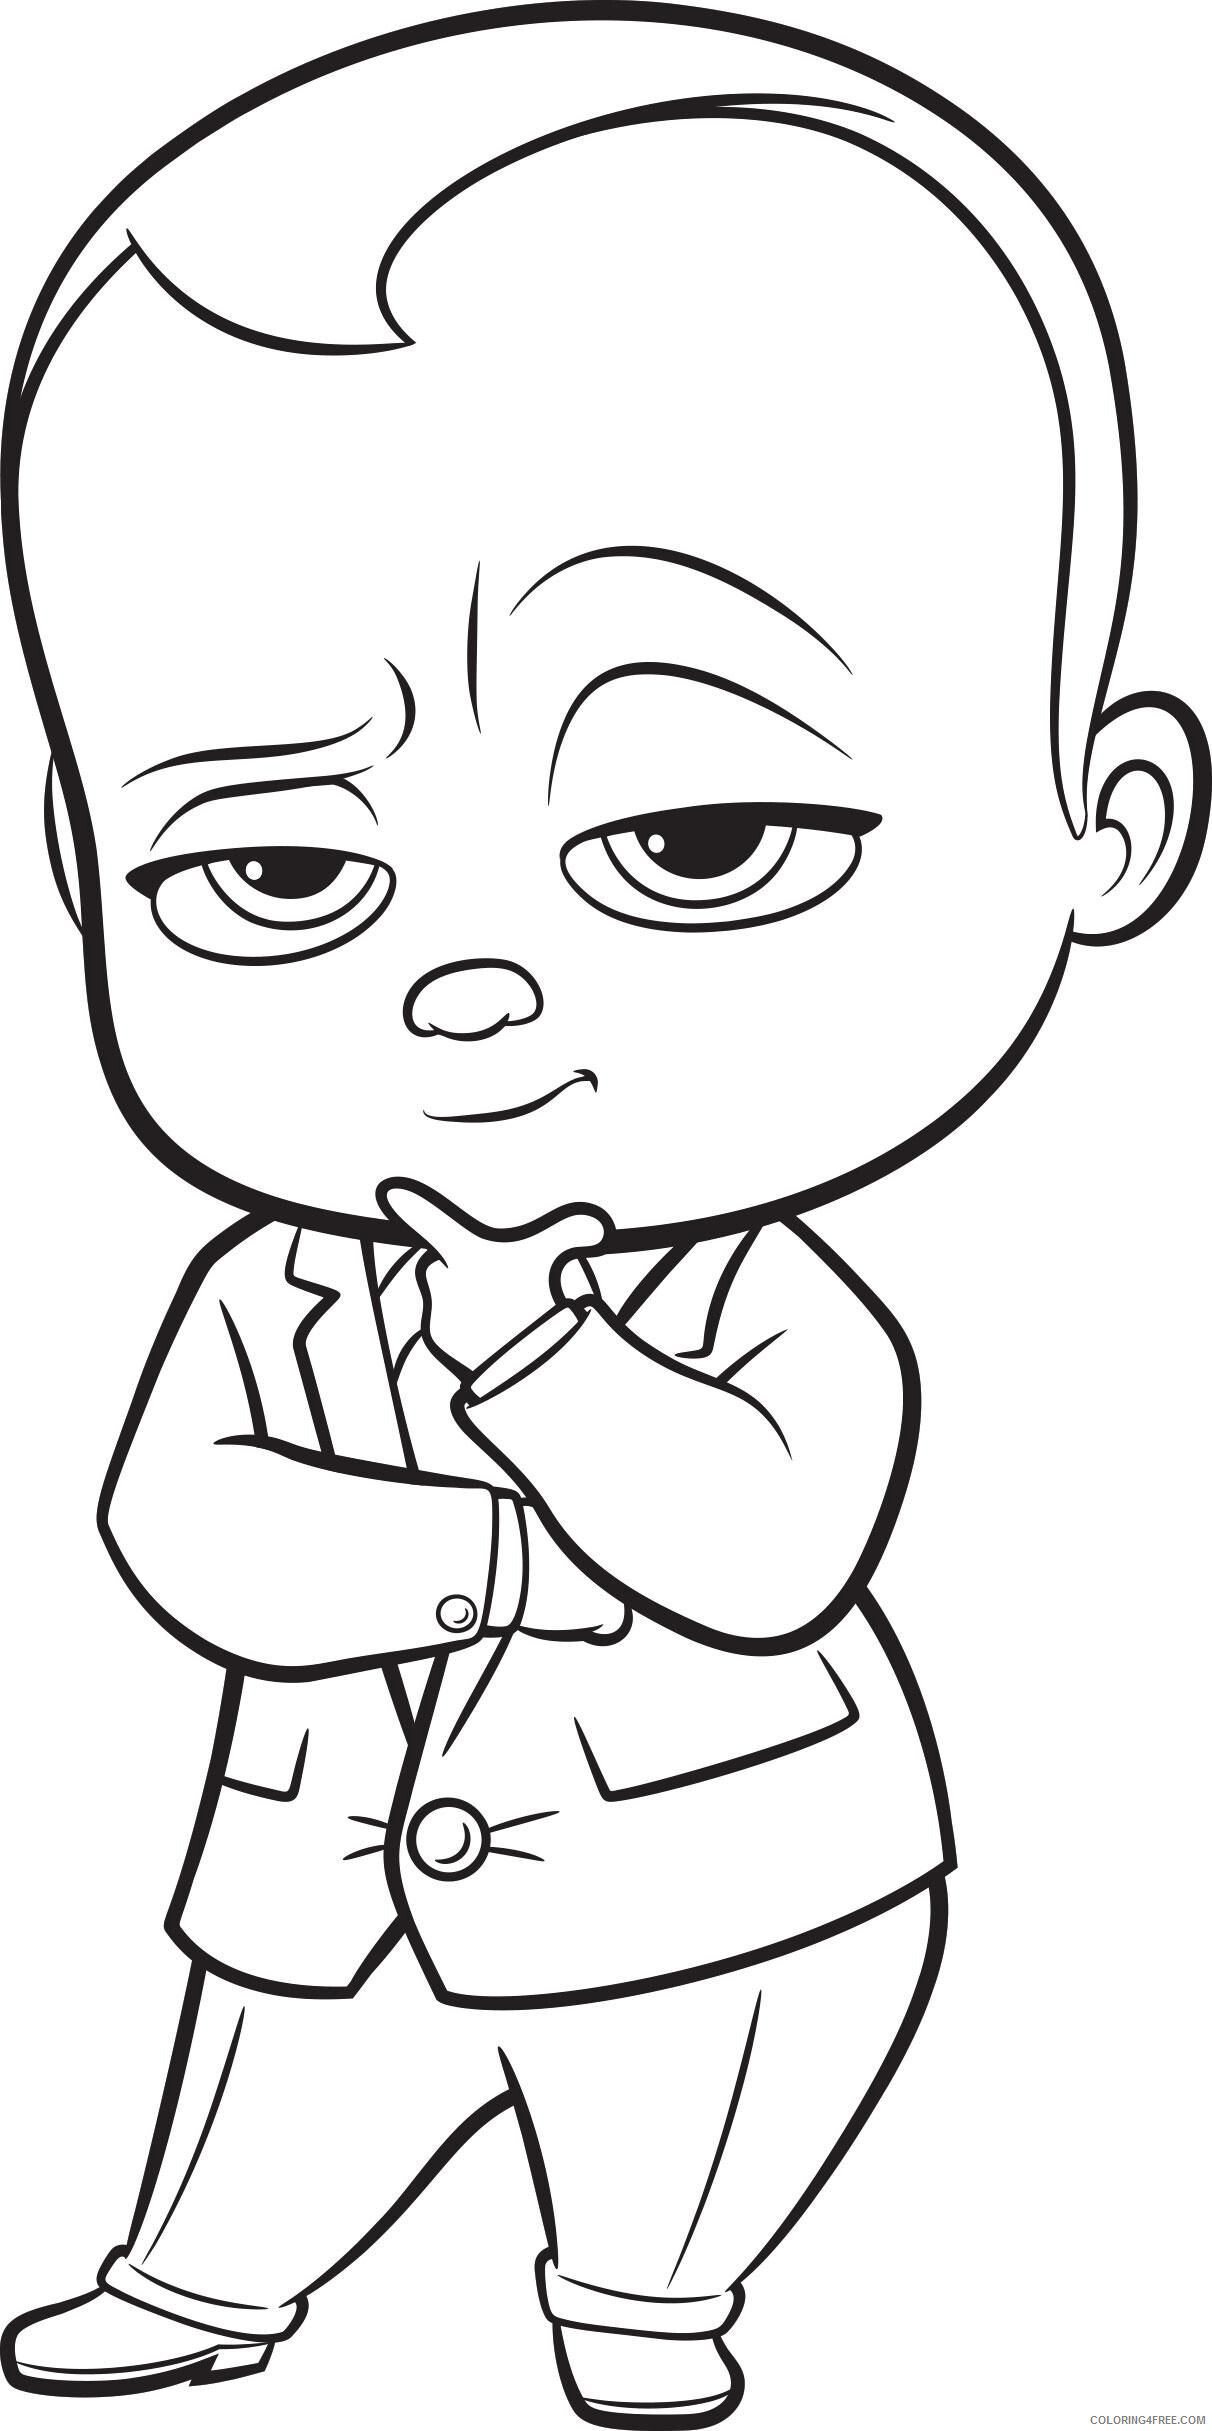 Boss Baby Coloring Pages TV Film Boss Baby 2 Printable 2020 01267 Coloring4free